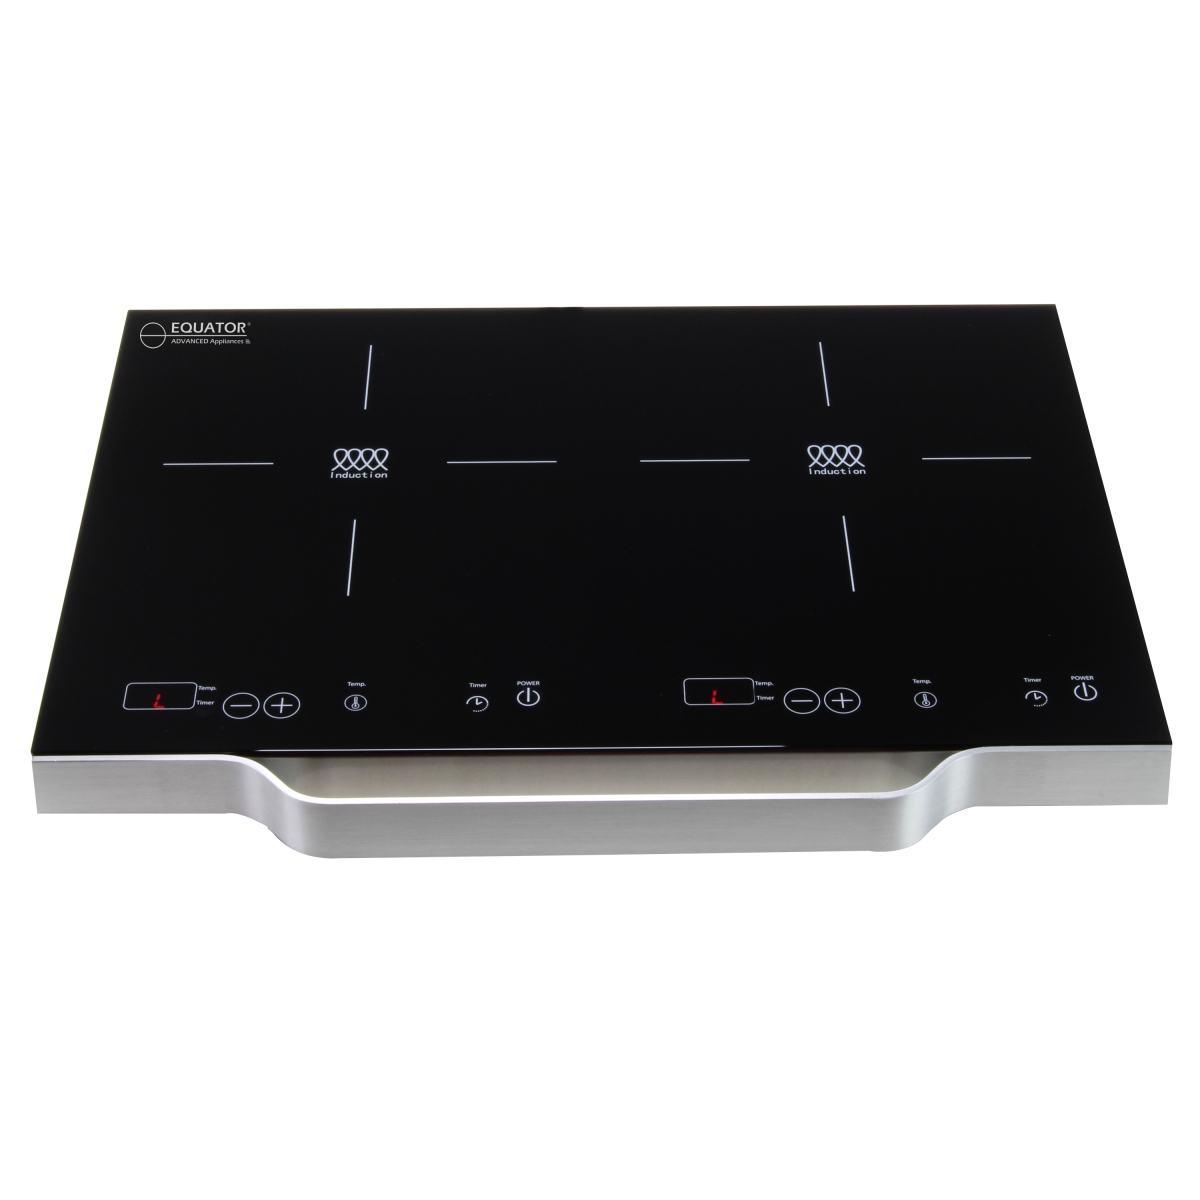 UPC 747037110110 product image for PIC 200 Portable Induction Cooktop | upcitemdb.com